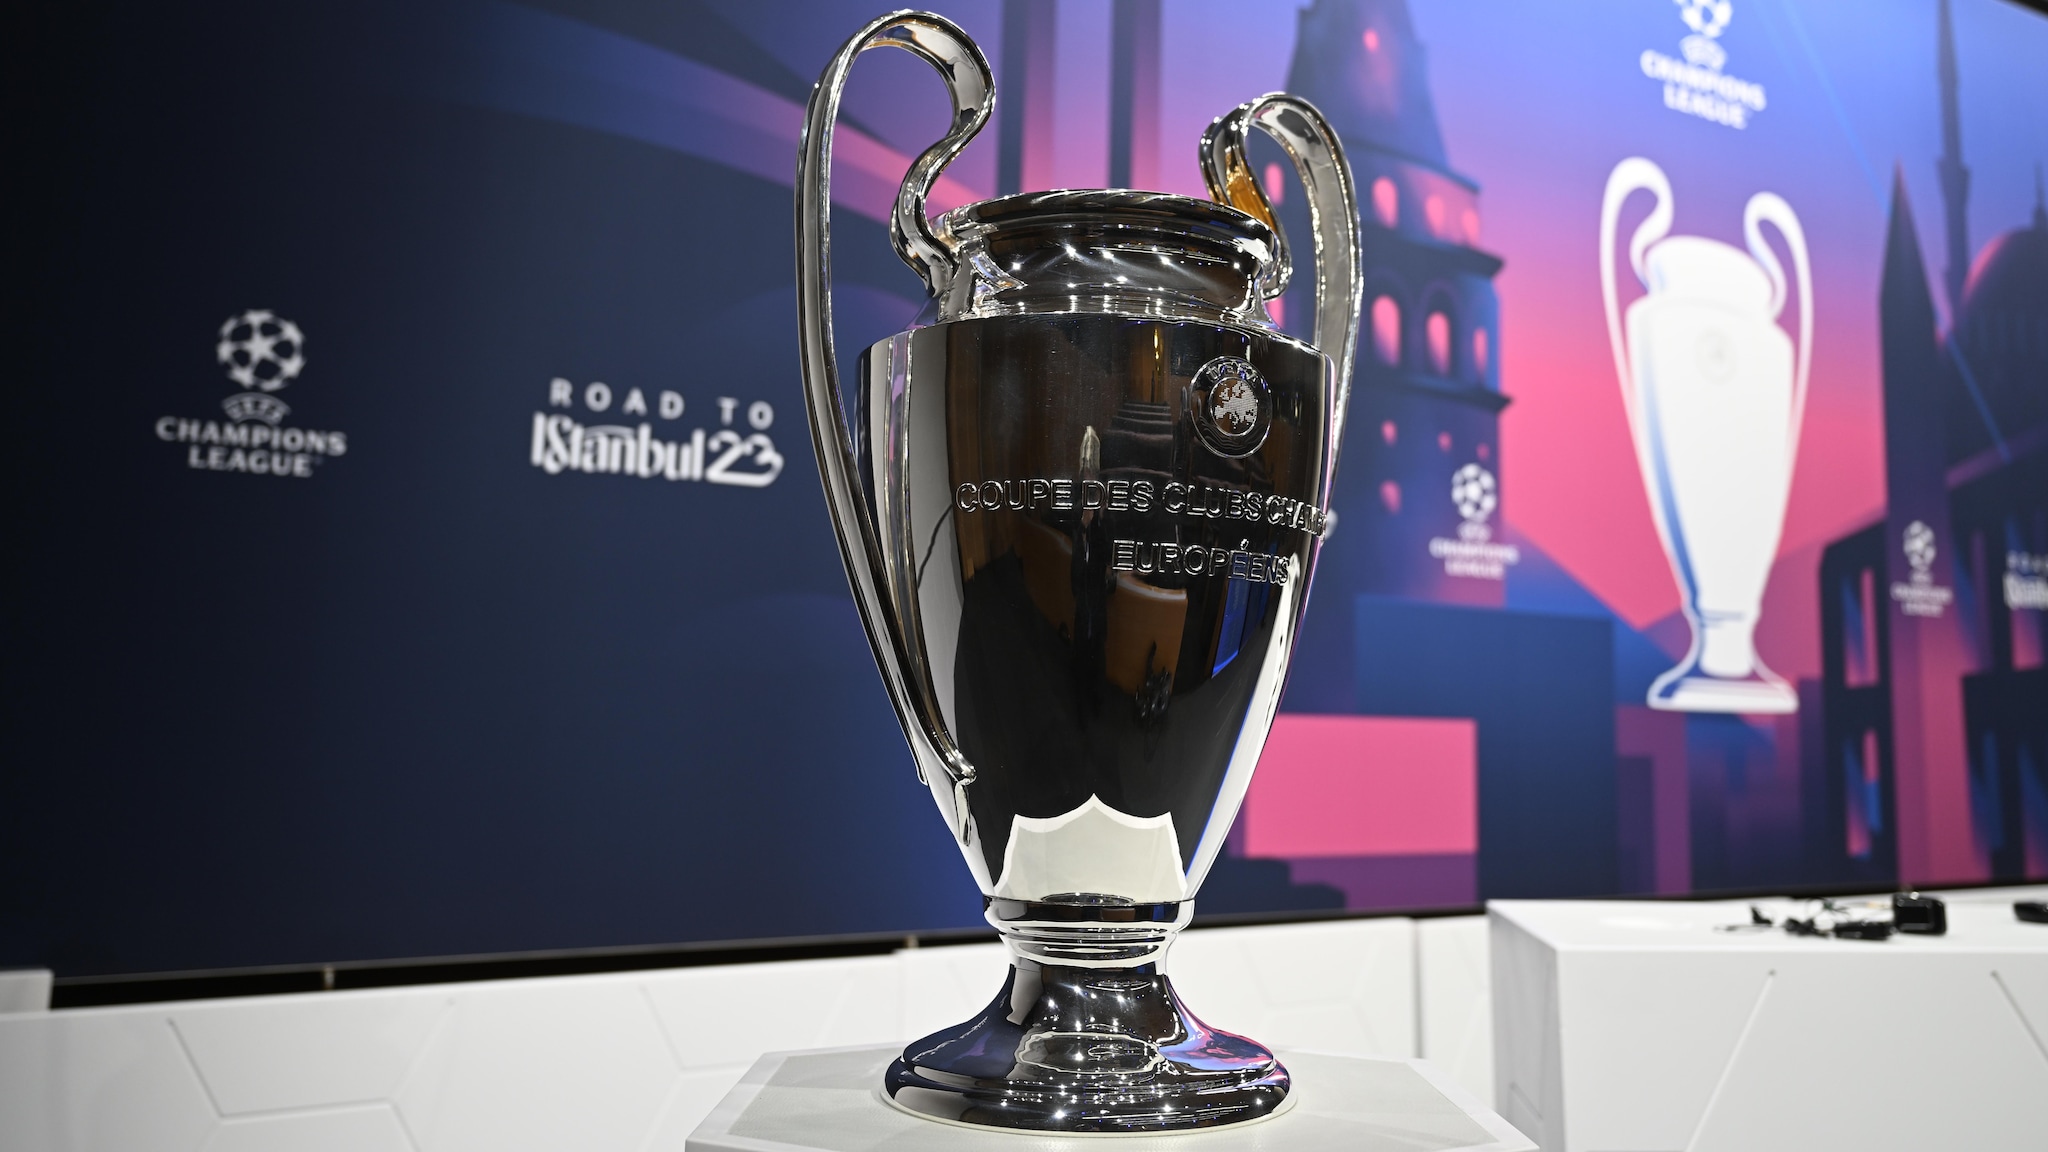 Prime Video Gets 16 Champions League Games in Italy